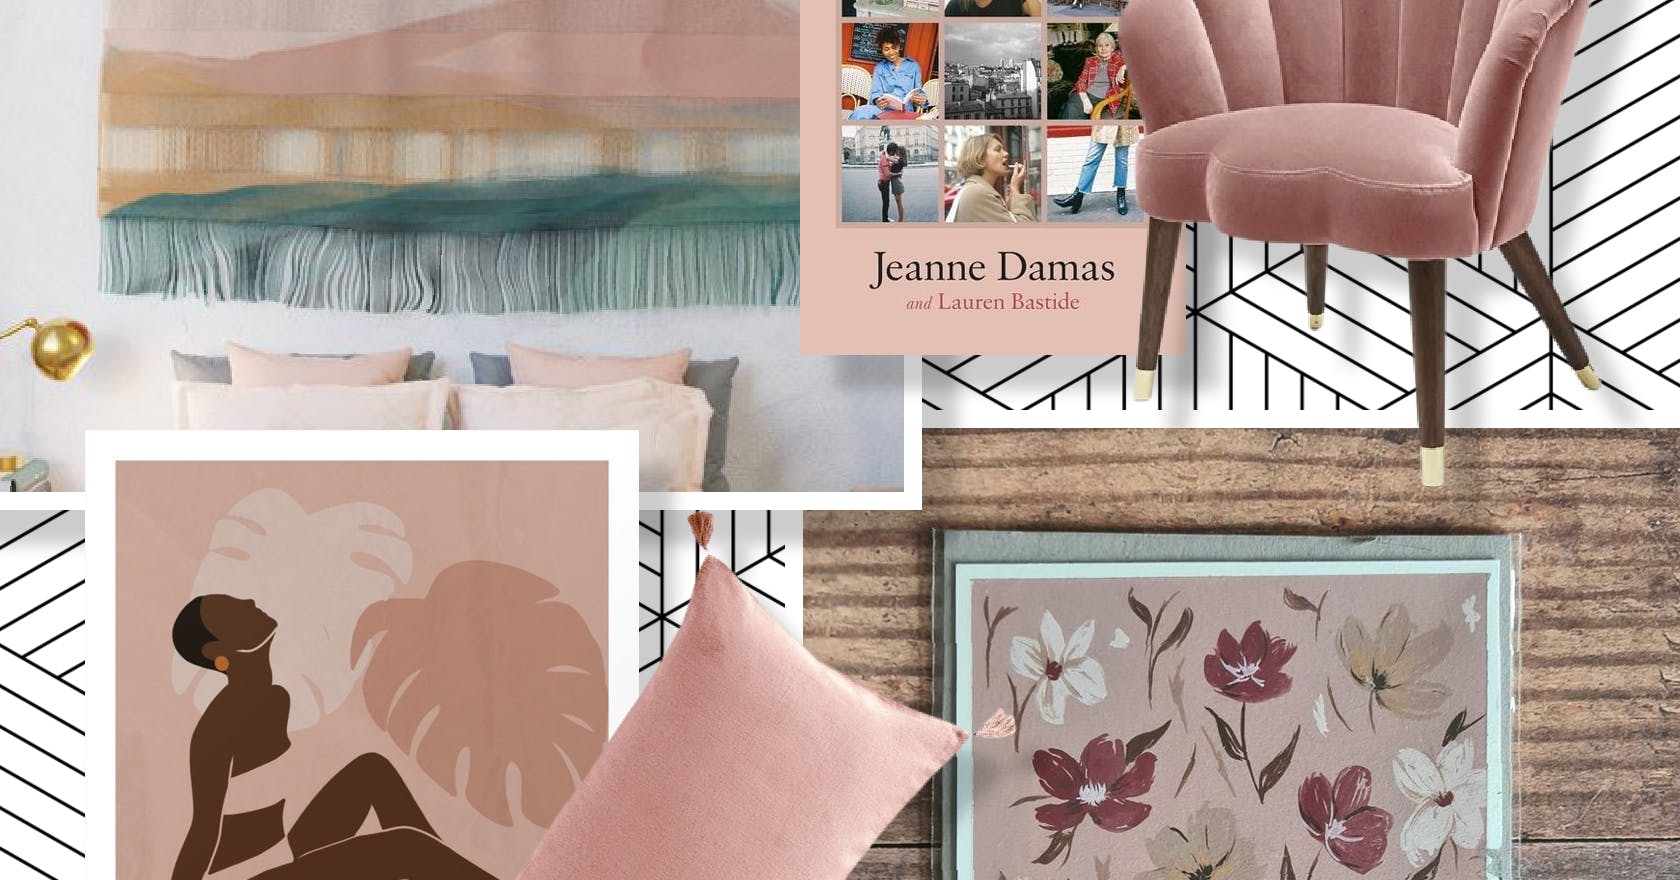 Blush pink home accessories and art prints